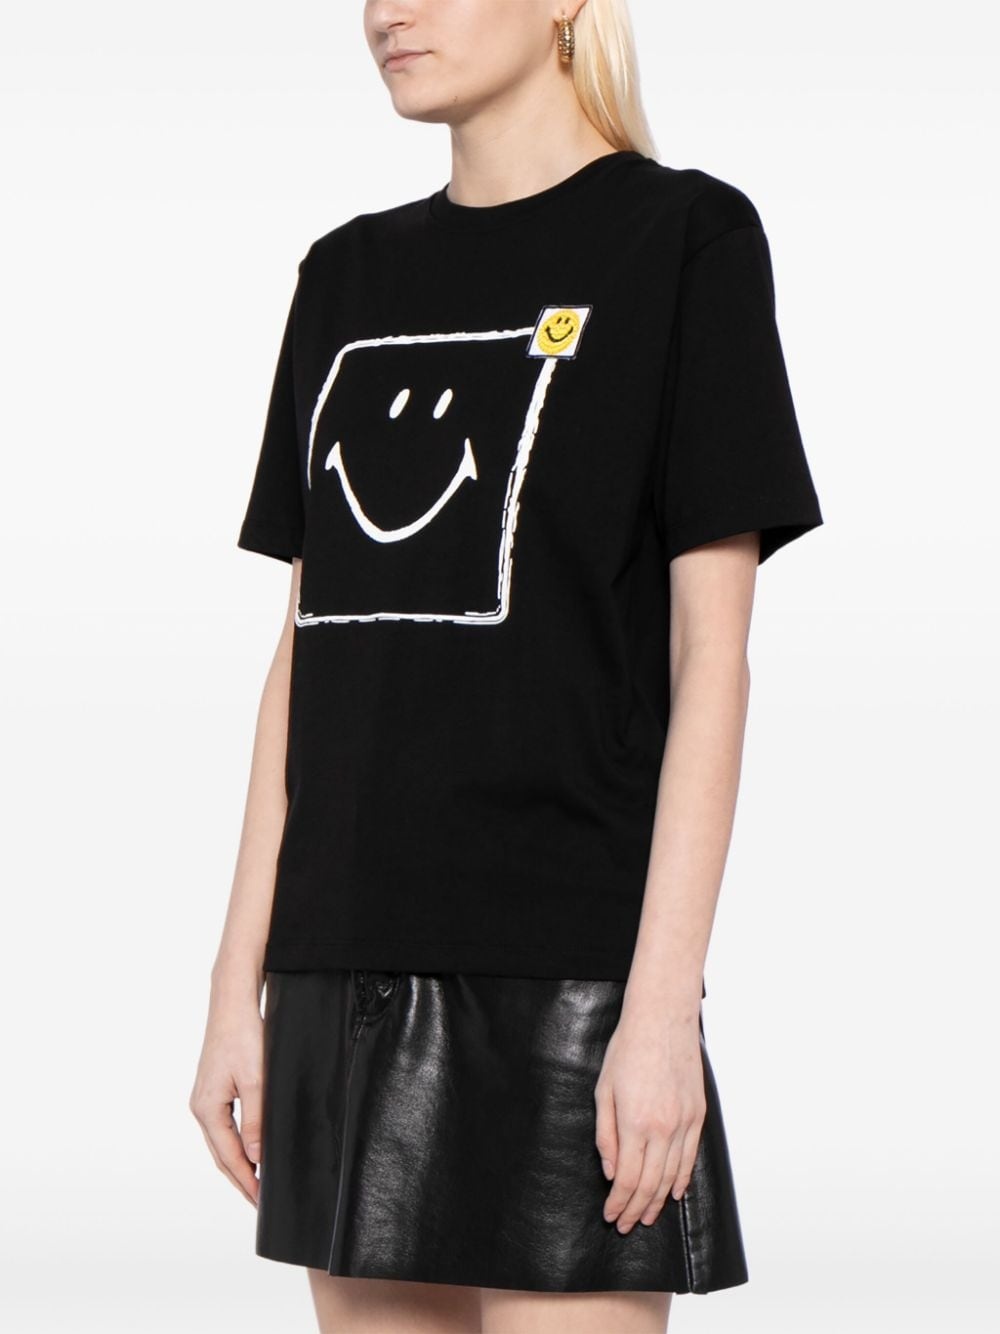 square smiley face-print T-shirt - 3